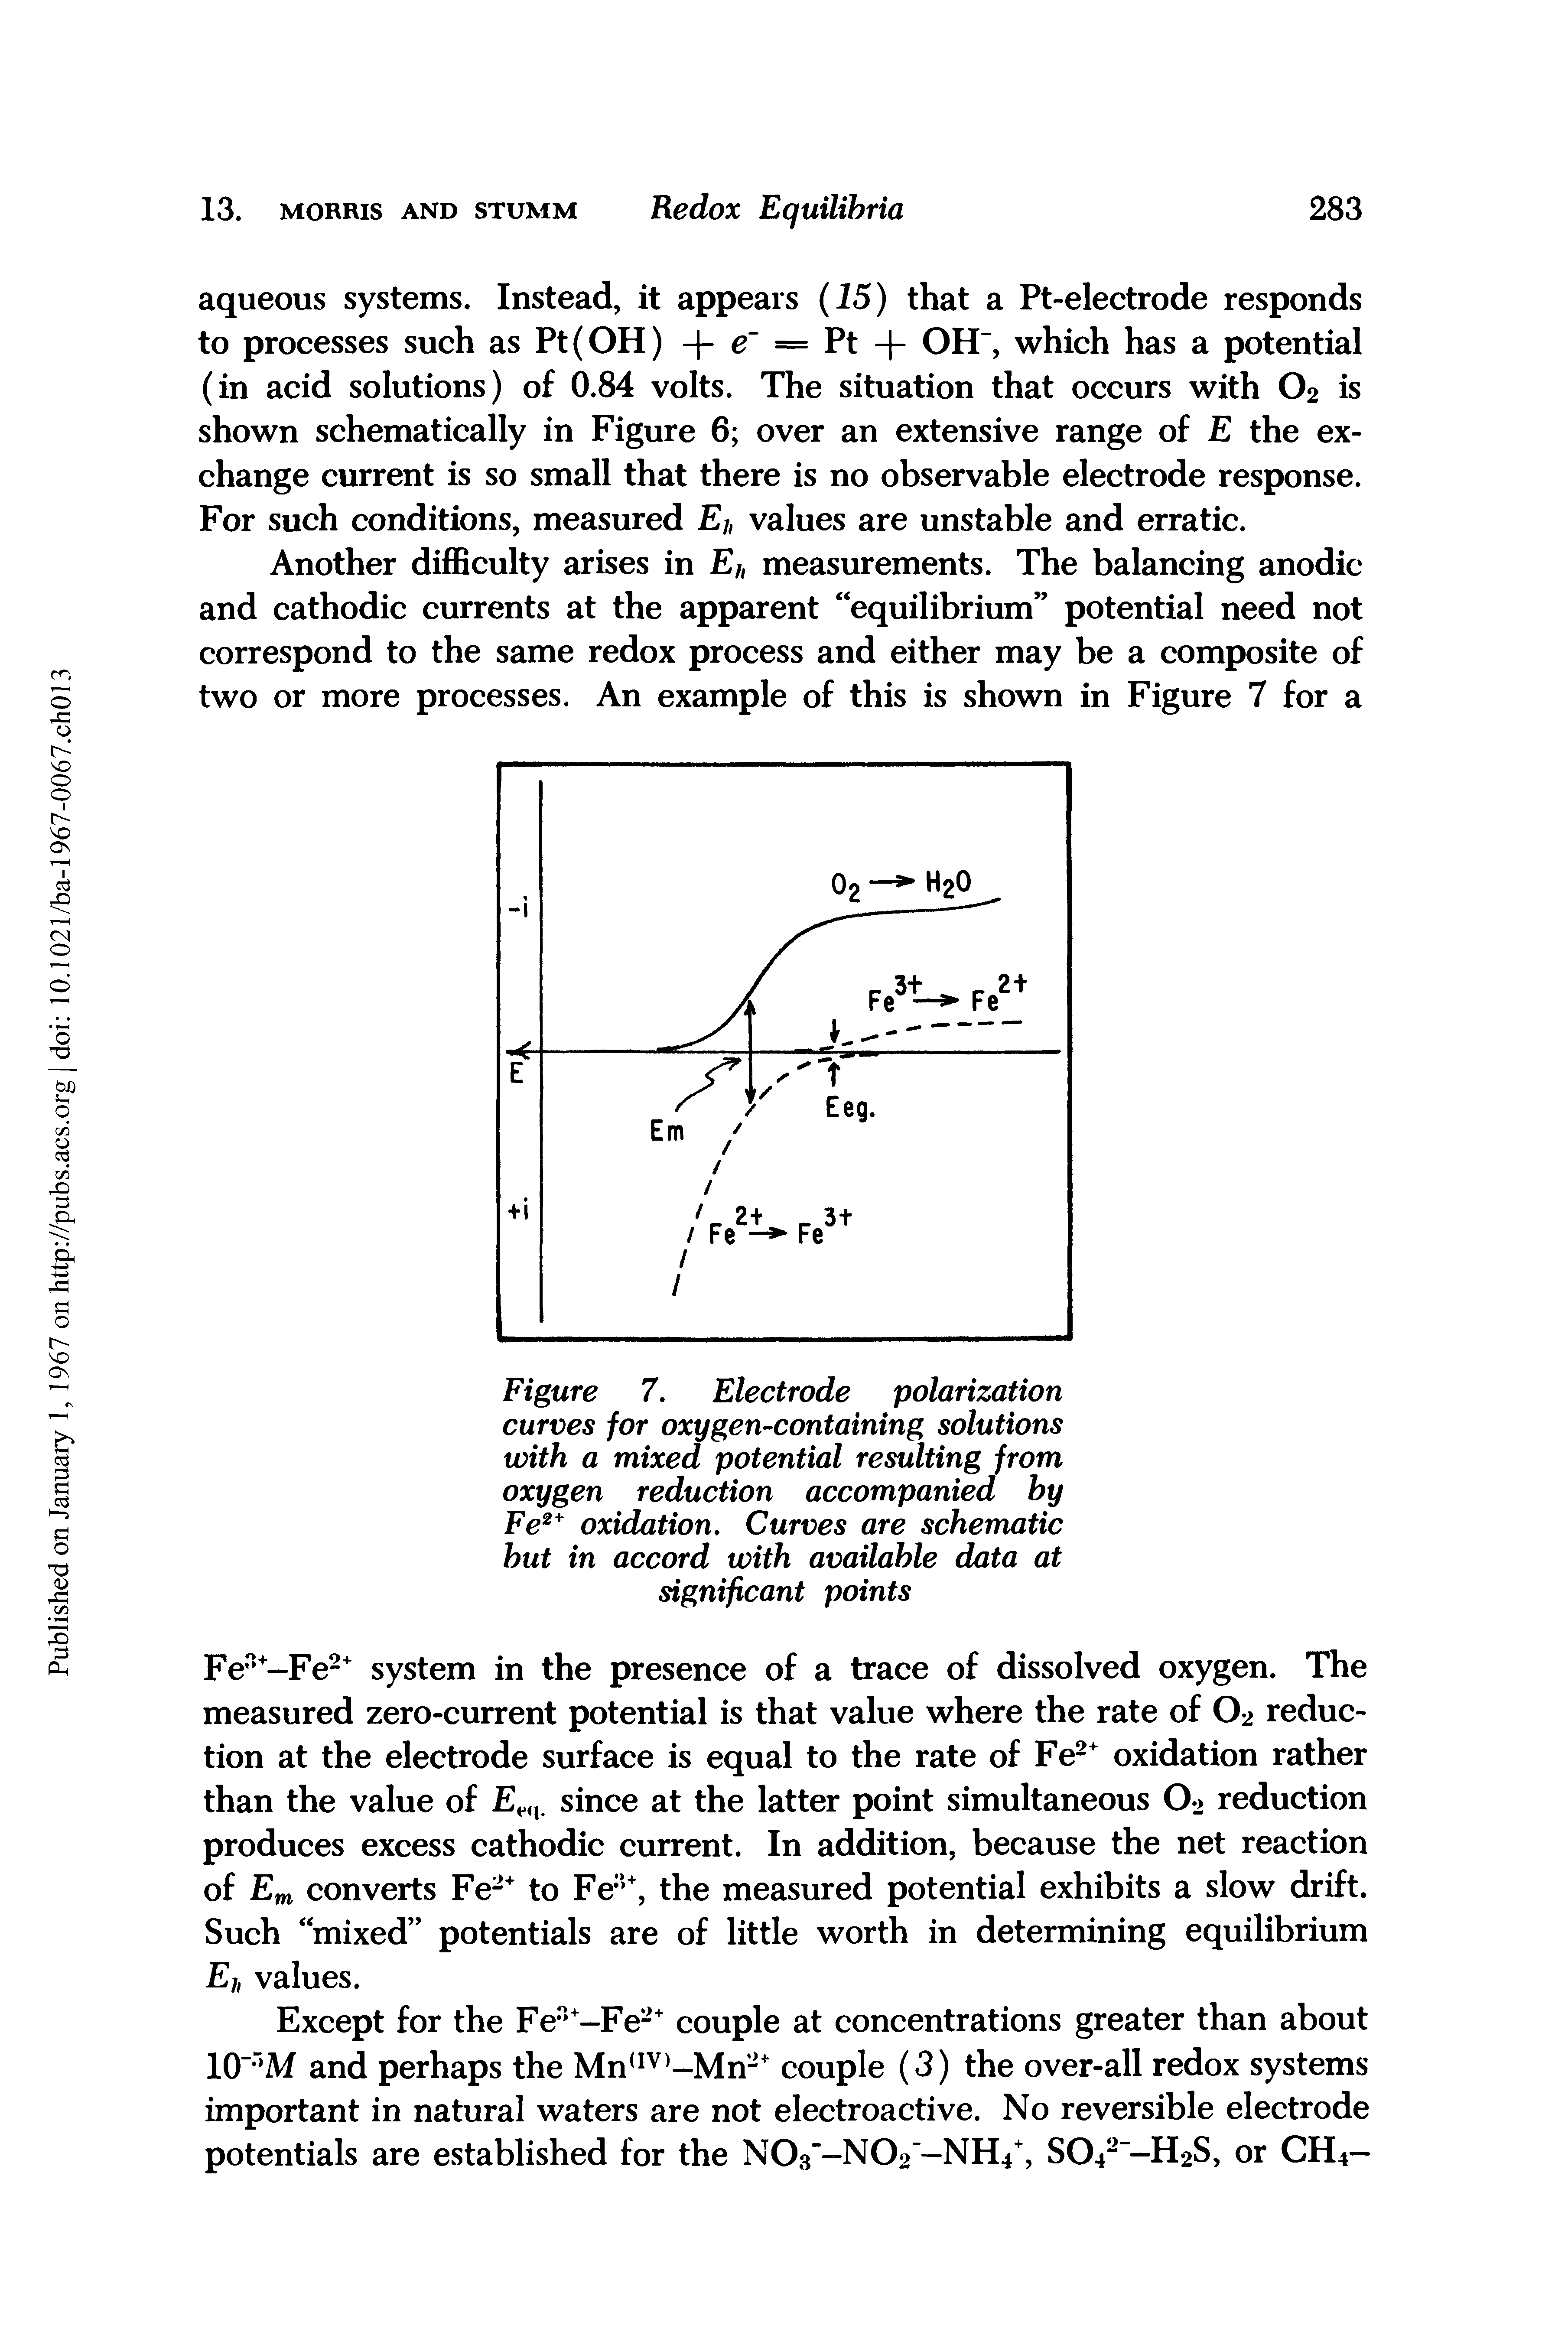 Figure 7. Electrode polarization curves for oxygen-containing solutions with a mixed potential resulting from oxygen reduction accompanied by Fe2+ oxidation. Curves are schematic but in accord with available data at significant points...